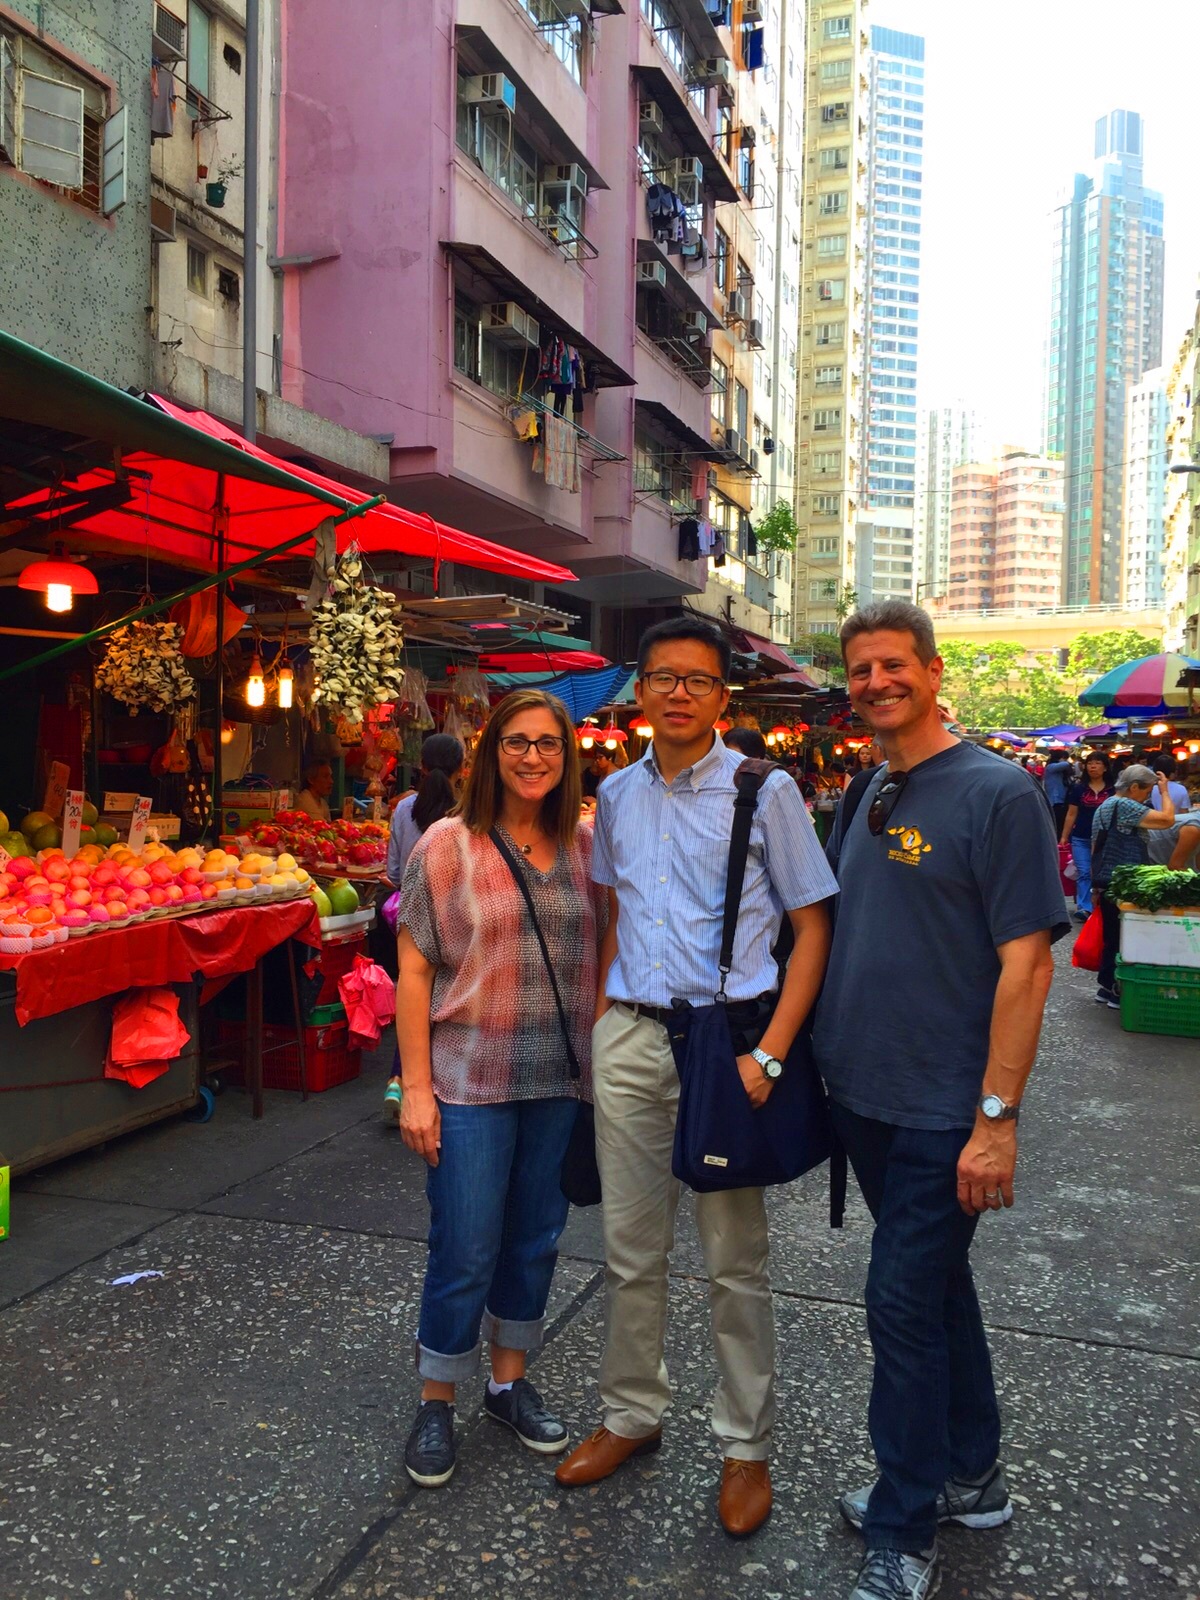 Frank the tour guide with guests at Shau Kei Wan Food Market